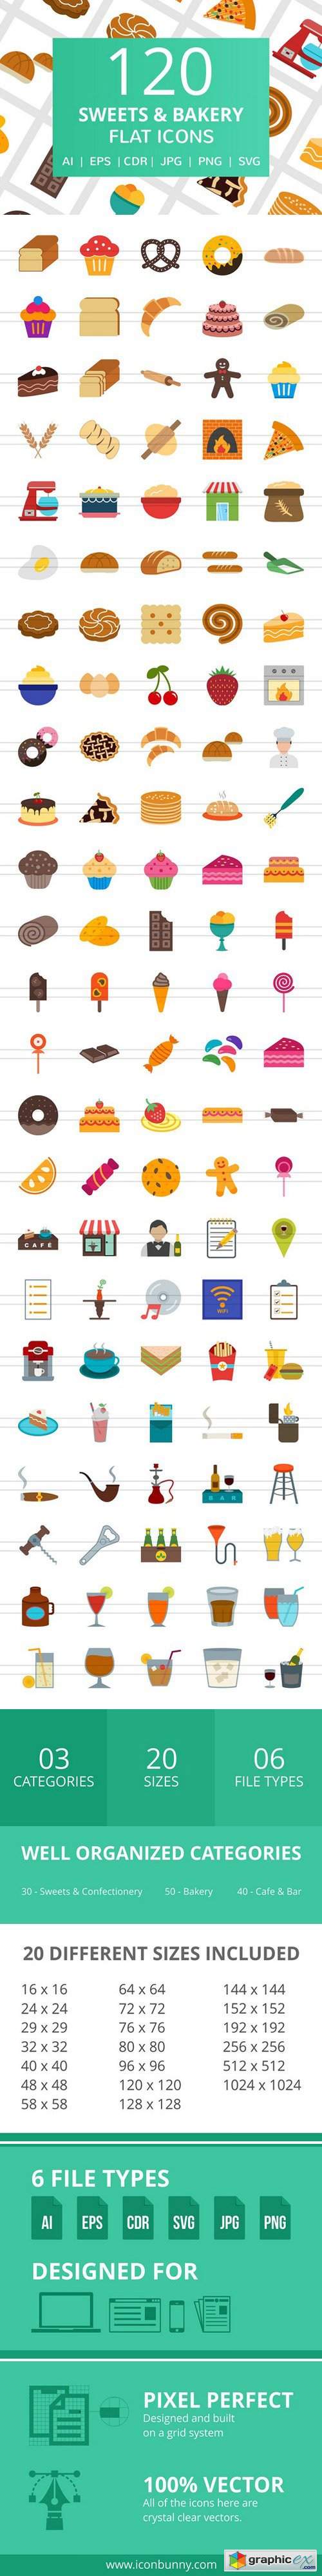 120 Sweets & Bakery Flat Icons